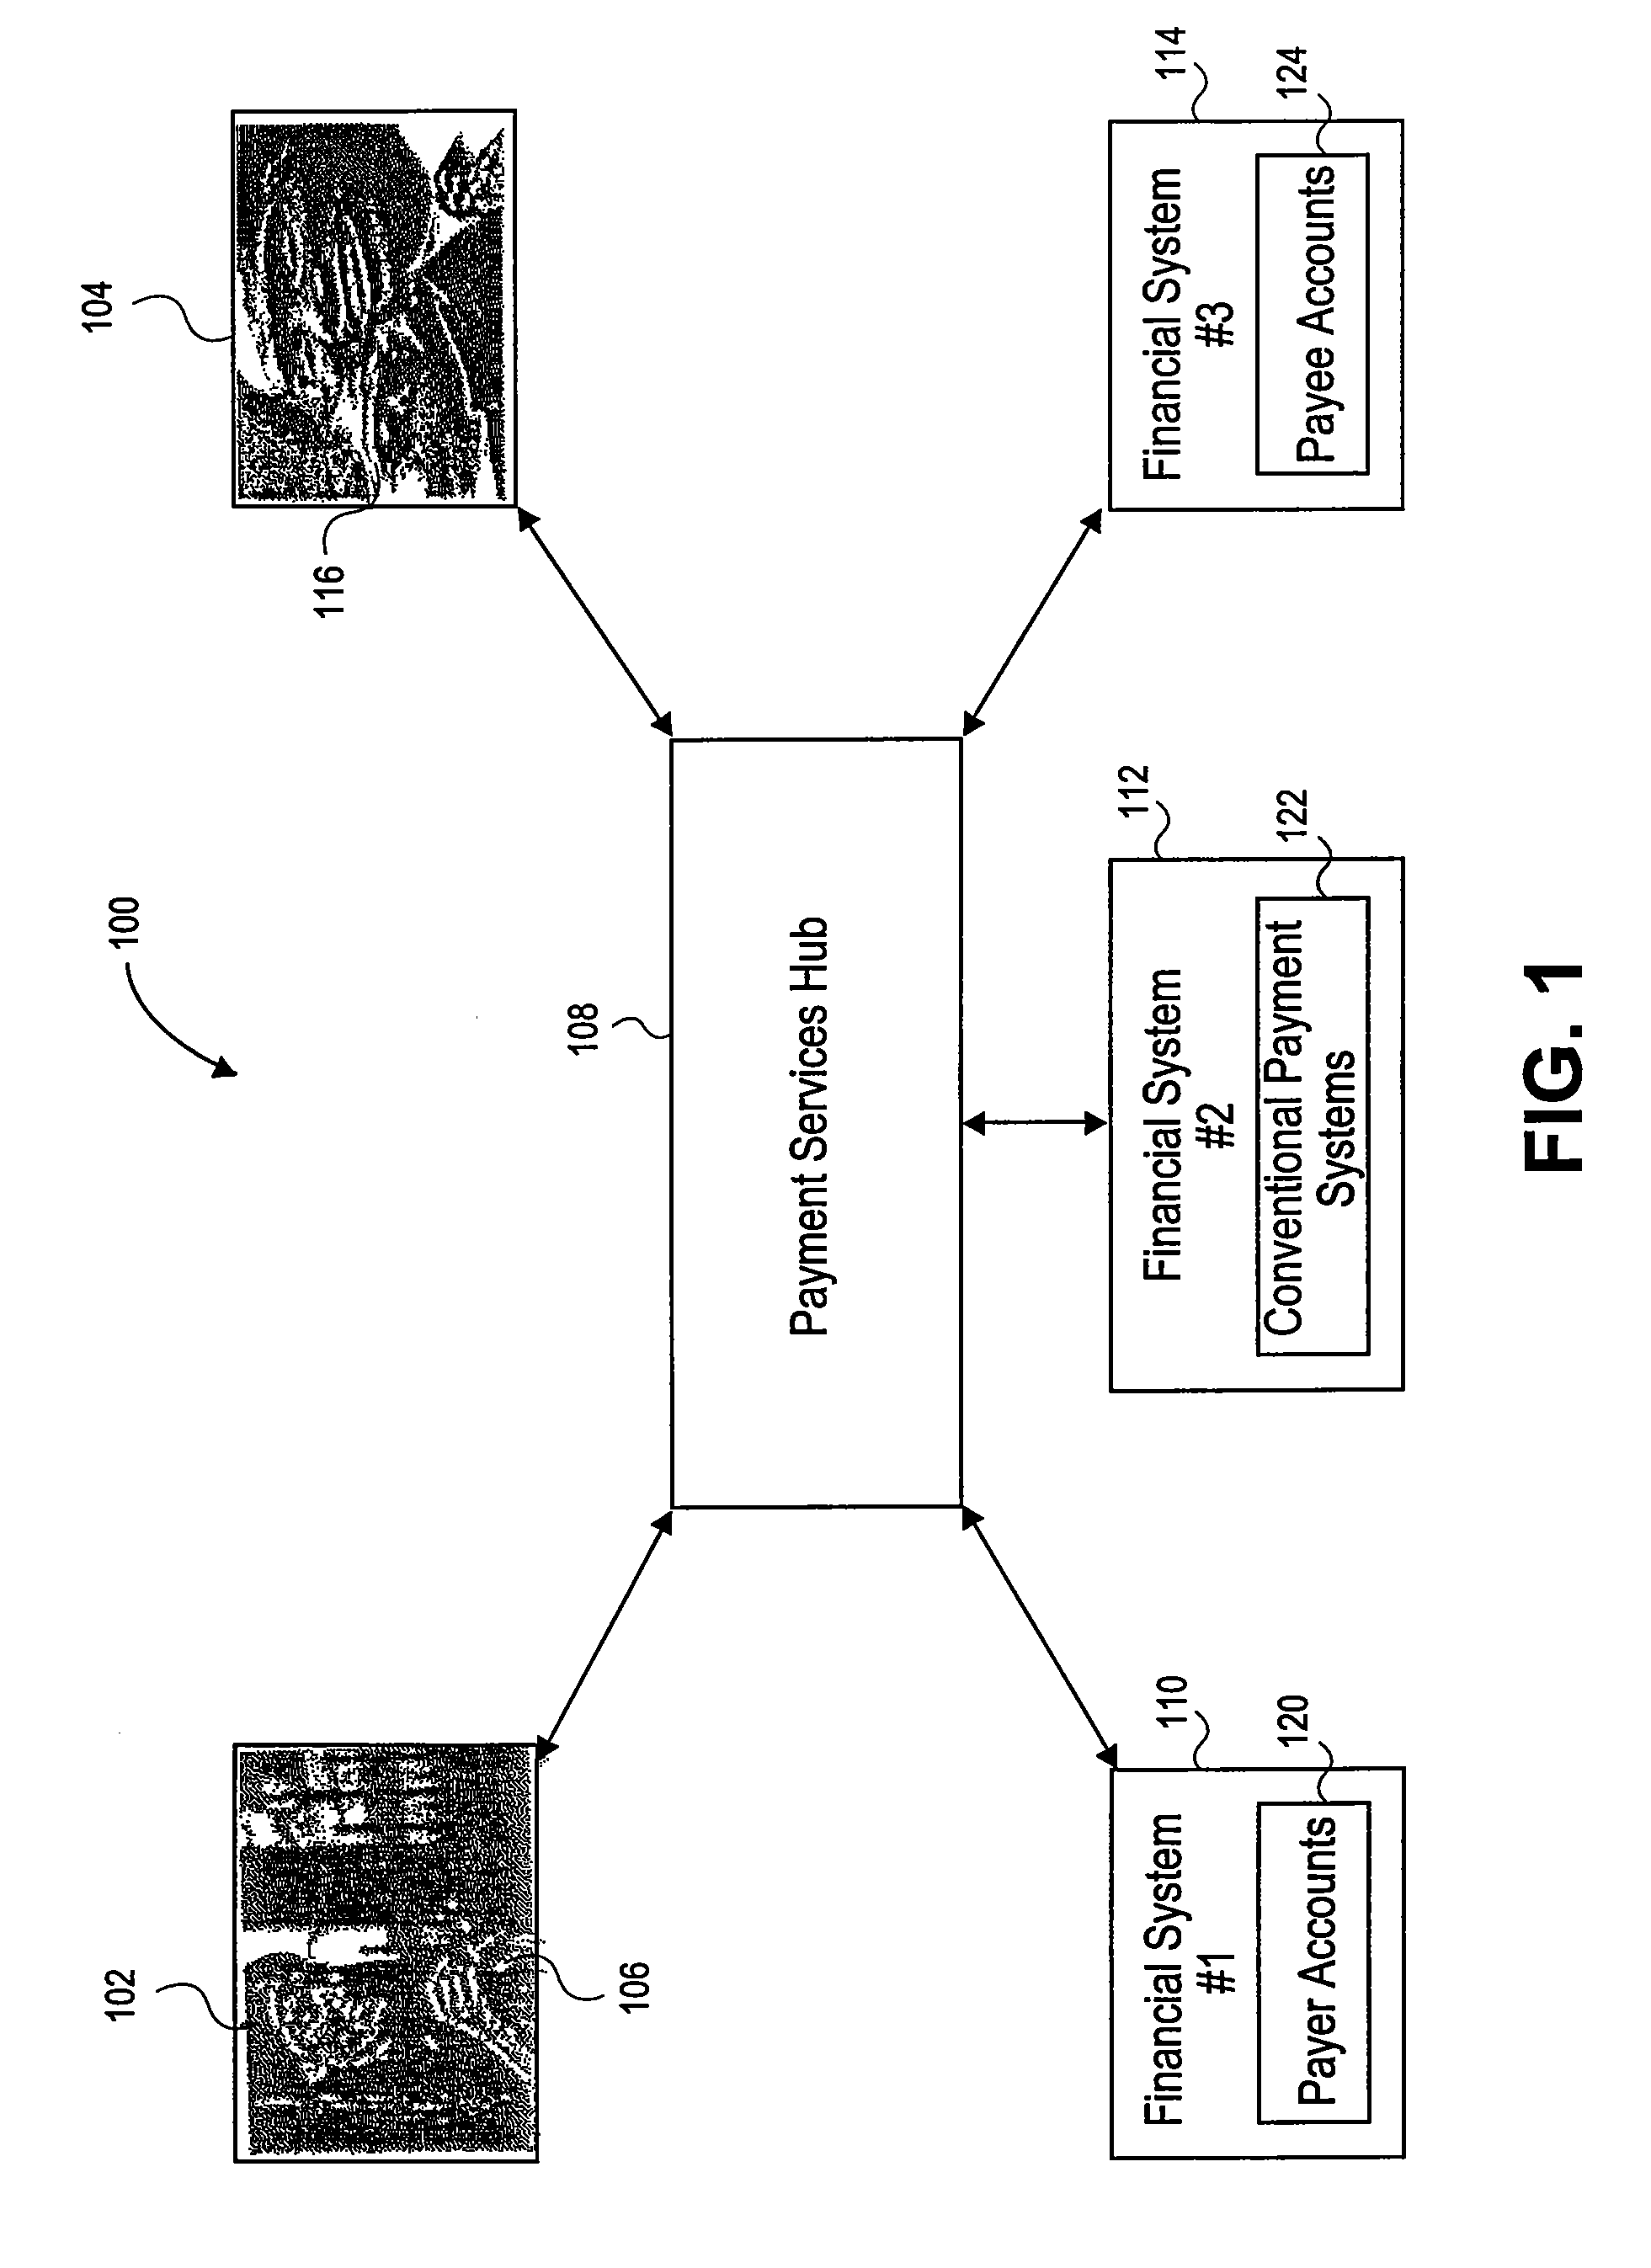 Method and system for facilitating payment transactions using access devices